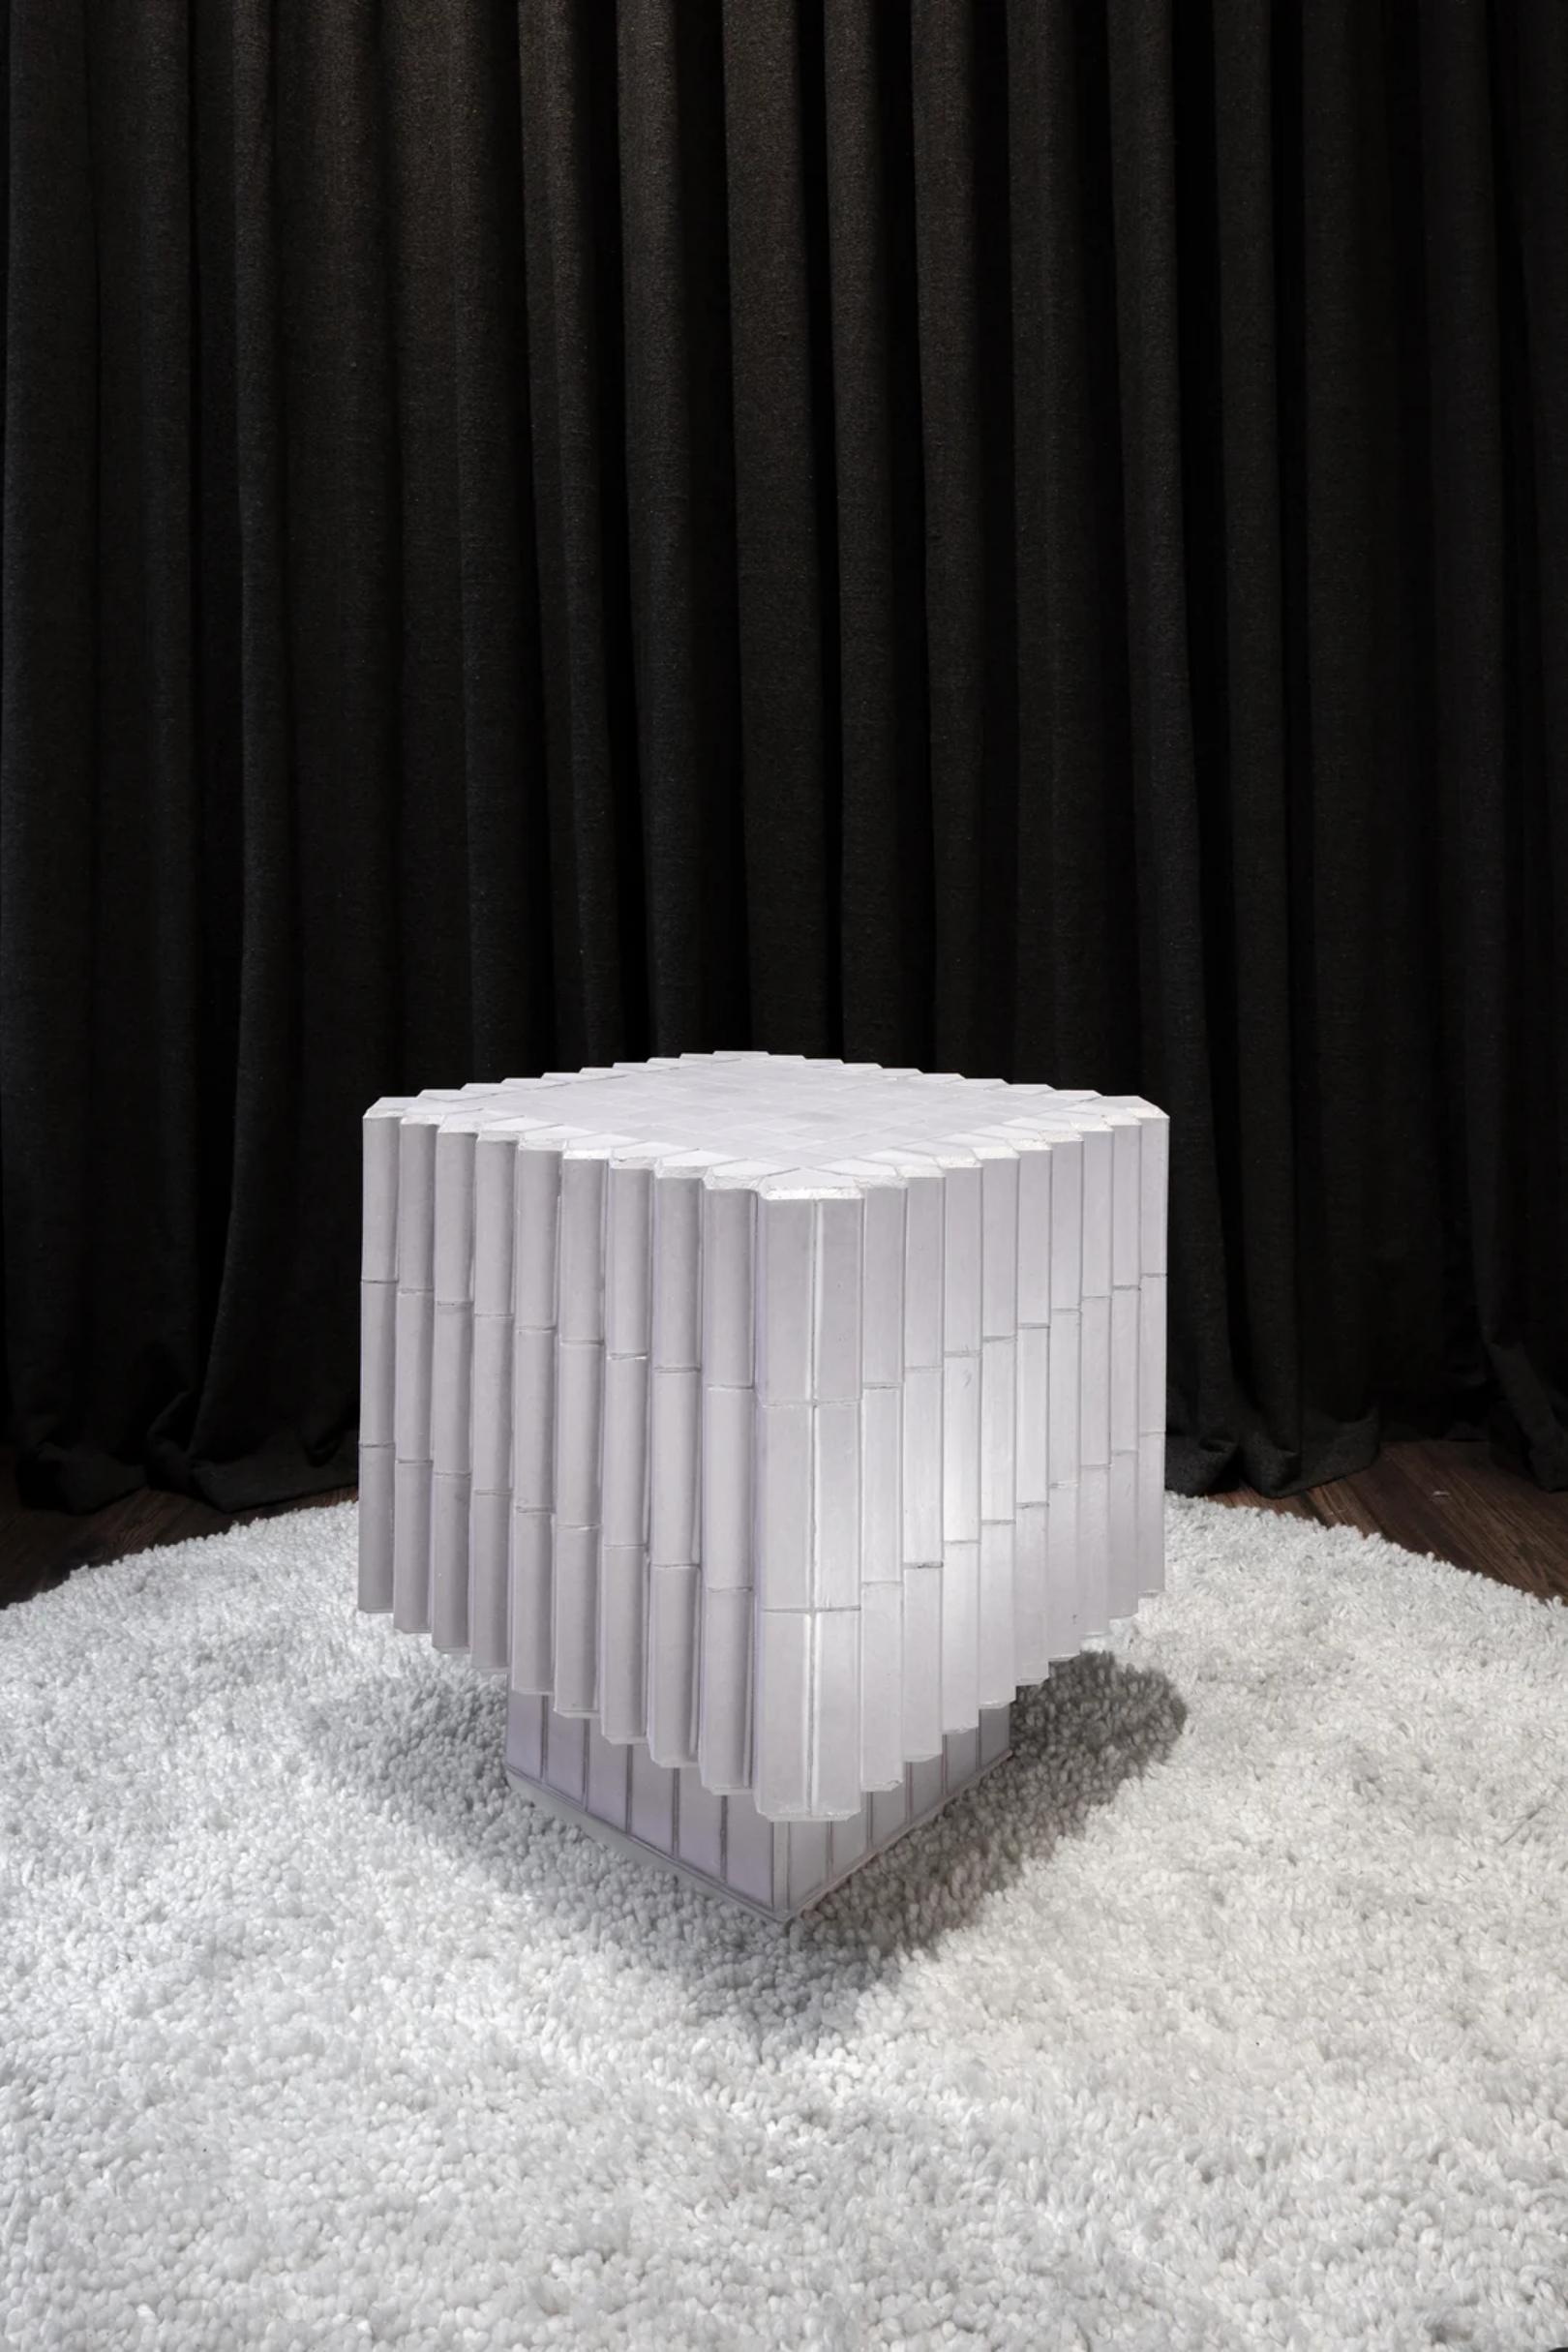 Pedestal Side Table by Txt.Ure
Perla Valtierra
Dimensions: W 57 x D 57 x H 65 cm
Materials: Ceramic Exterior/Interior Side Table, Perla Valtierra Ceramic Tiles, Wood interior structure, Epoxic Paste
Weight: 40 kg
Also Available: Plastic Wheels upon